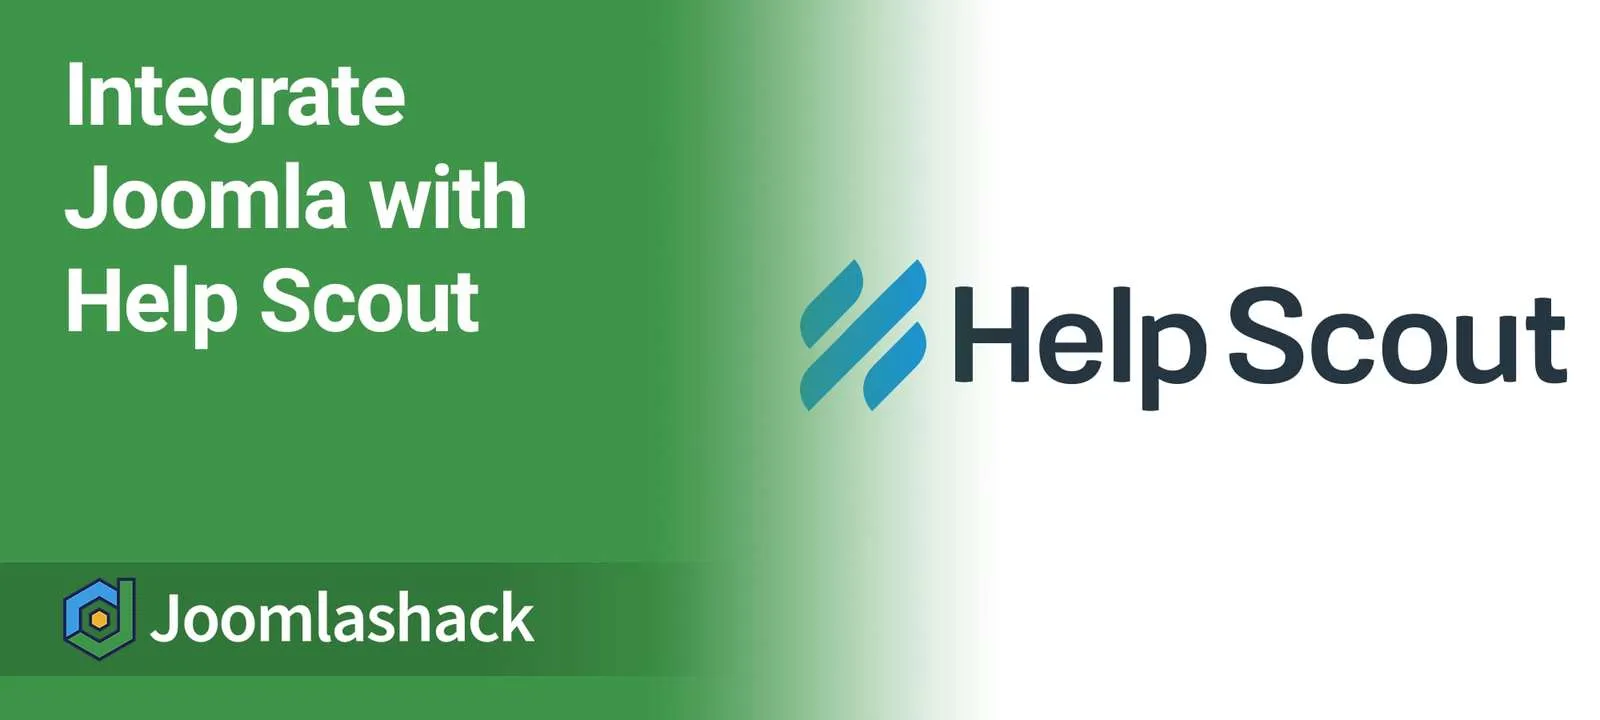 Shack HelpScout PRO v2.0.7 - Help Scout integration with Joomla